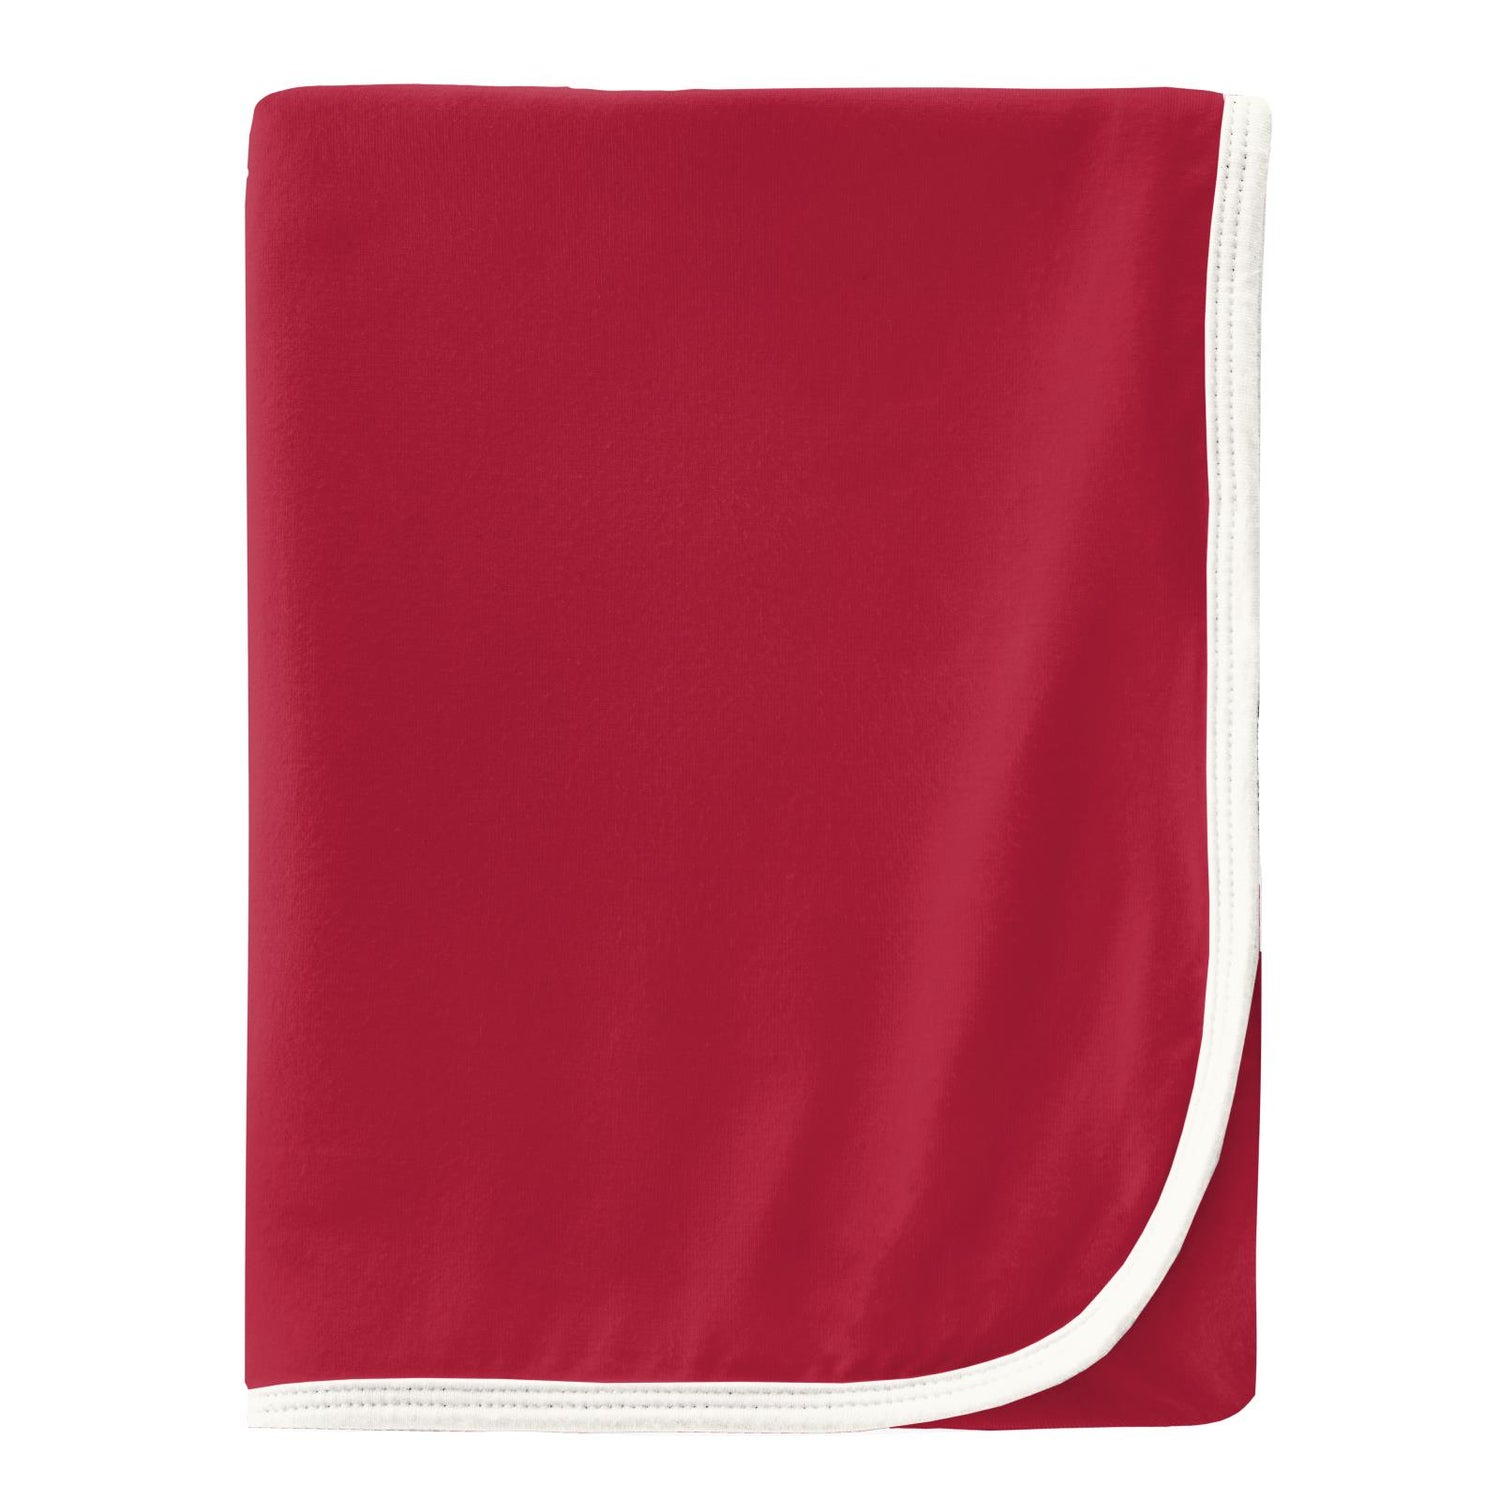 Swaddling Blanket in Crimson with Natural